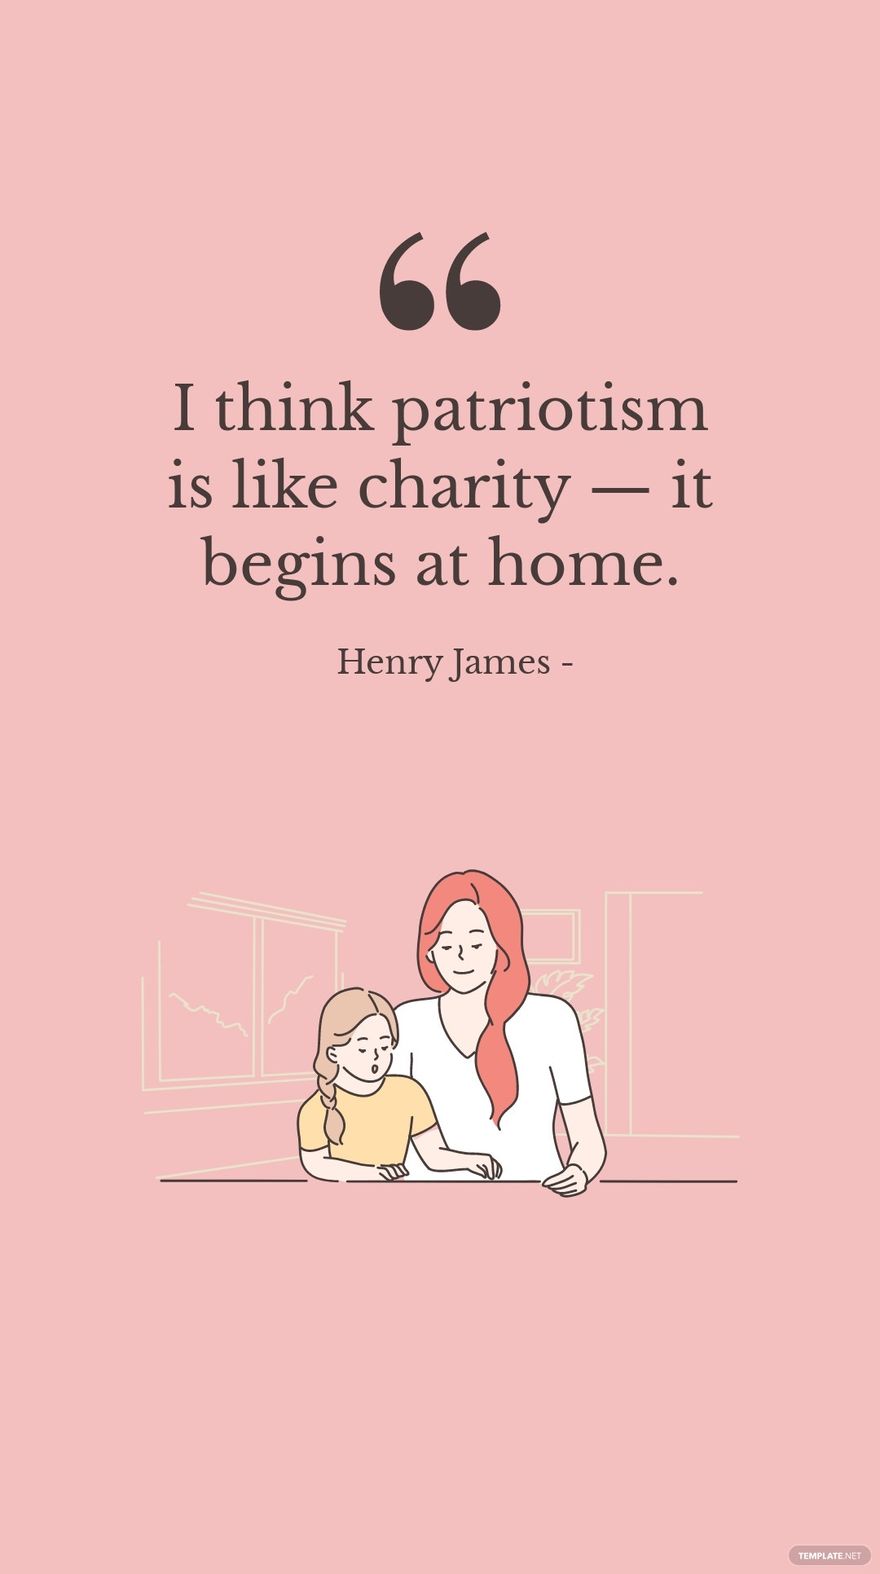 Free Henry James - I think patriotism is like charity — it begins at home. in JPG